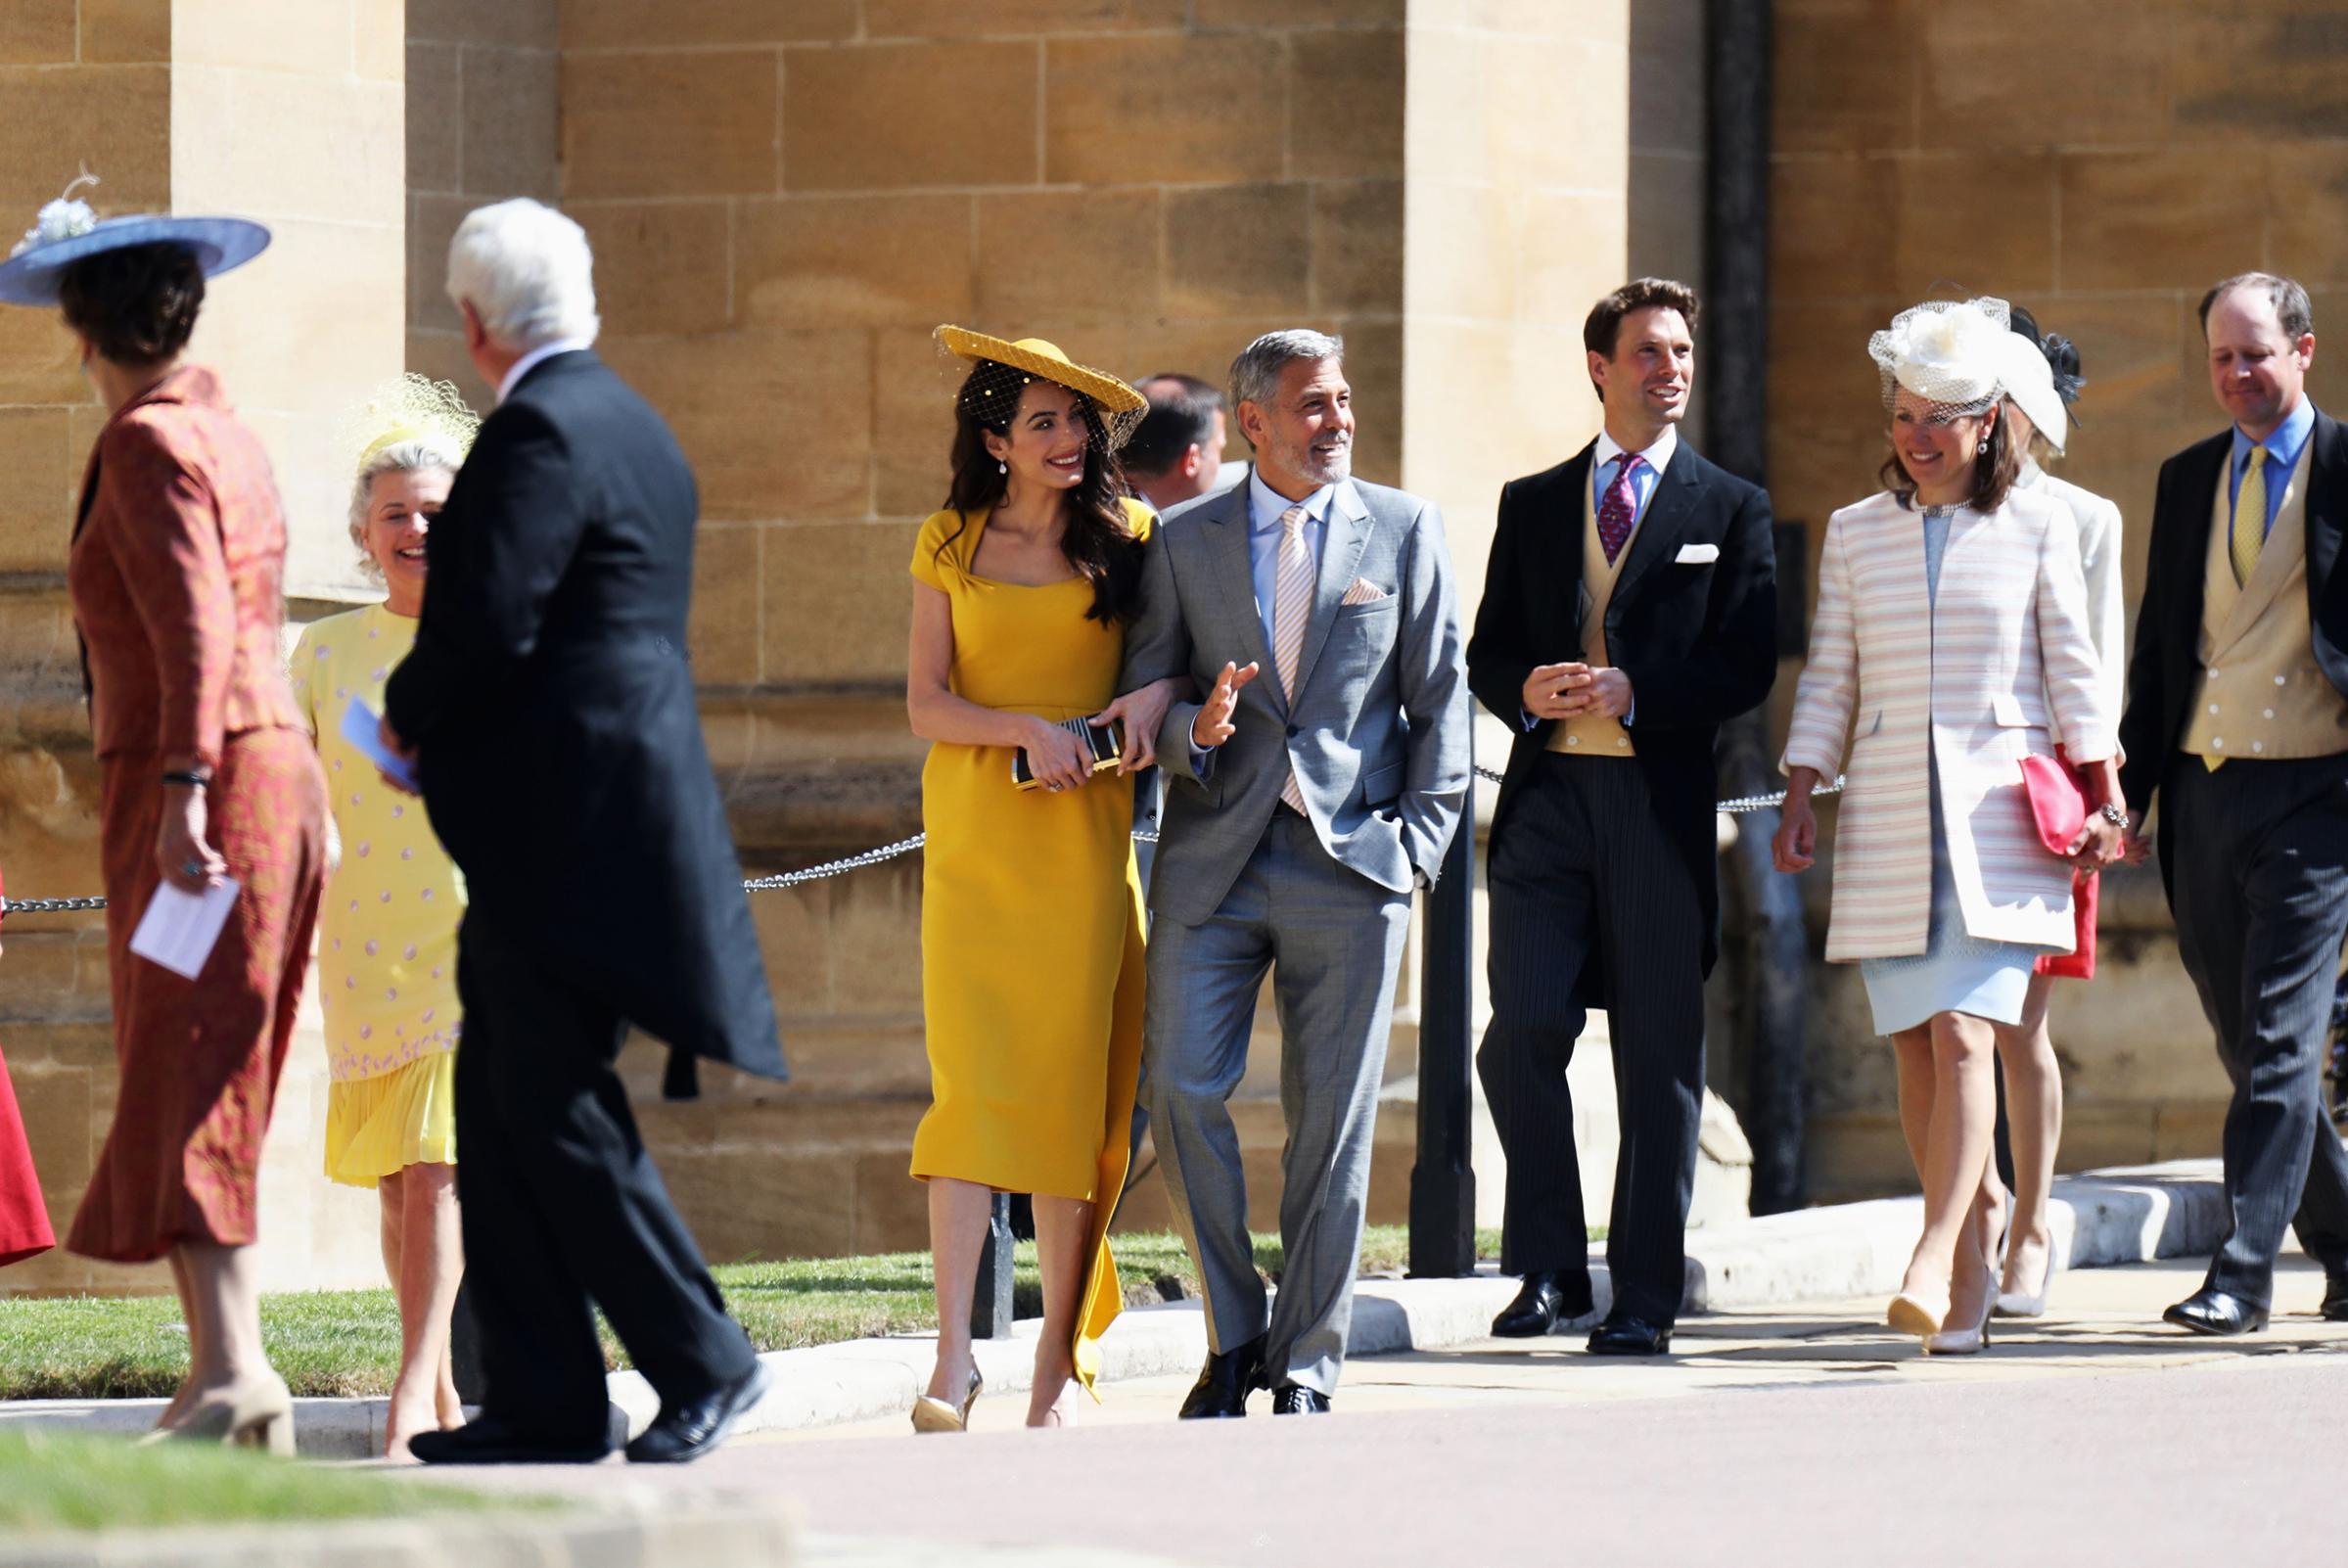 Amal Clooney and George Clooney arrive at the wedding of Prince Harry to Ms Meghan Markle at St George's Chapel, Windsor Castle on May 19, 2018 in Windsor, England.